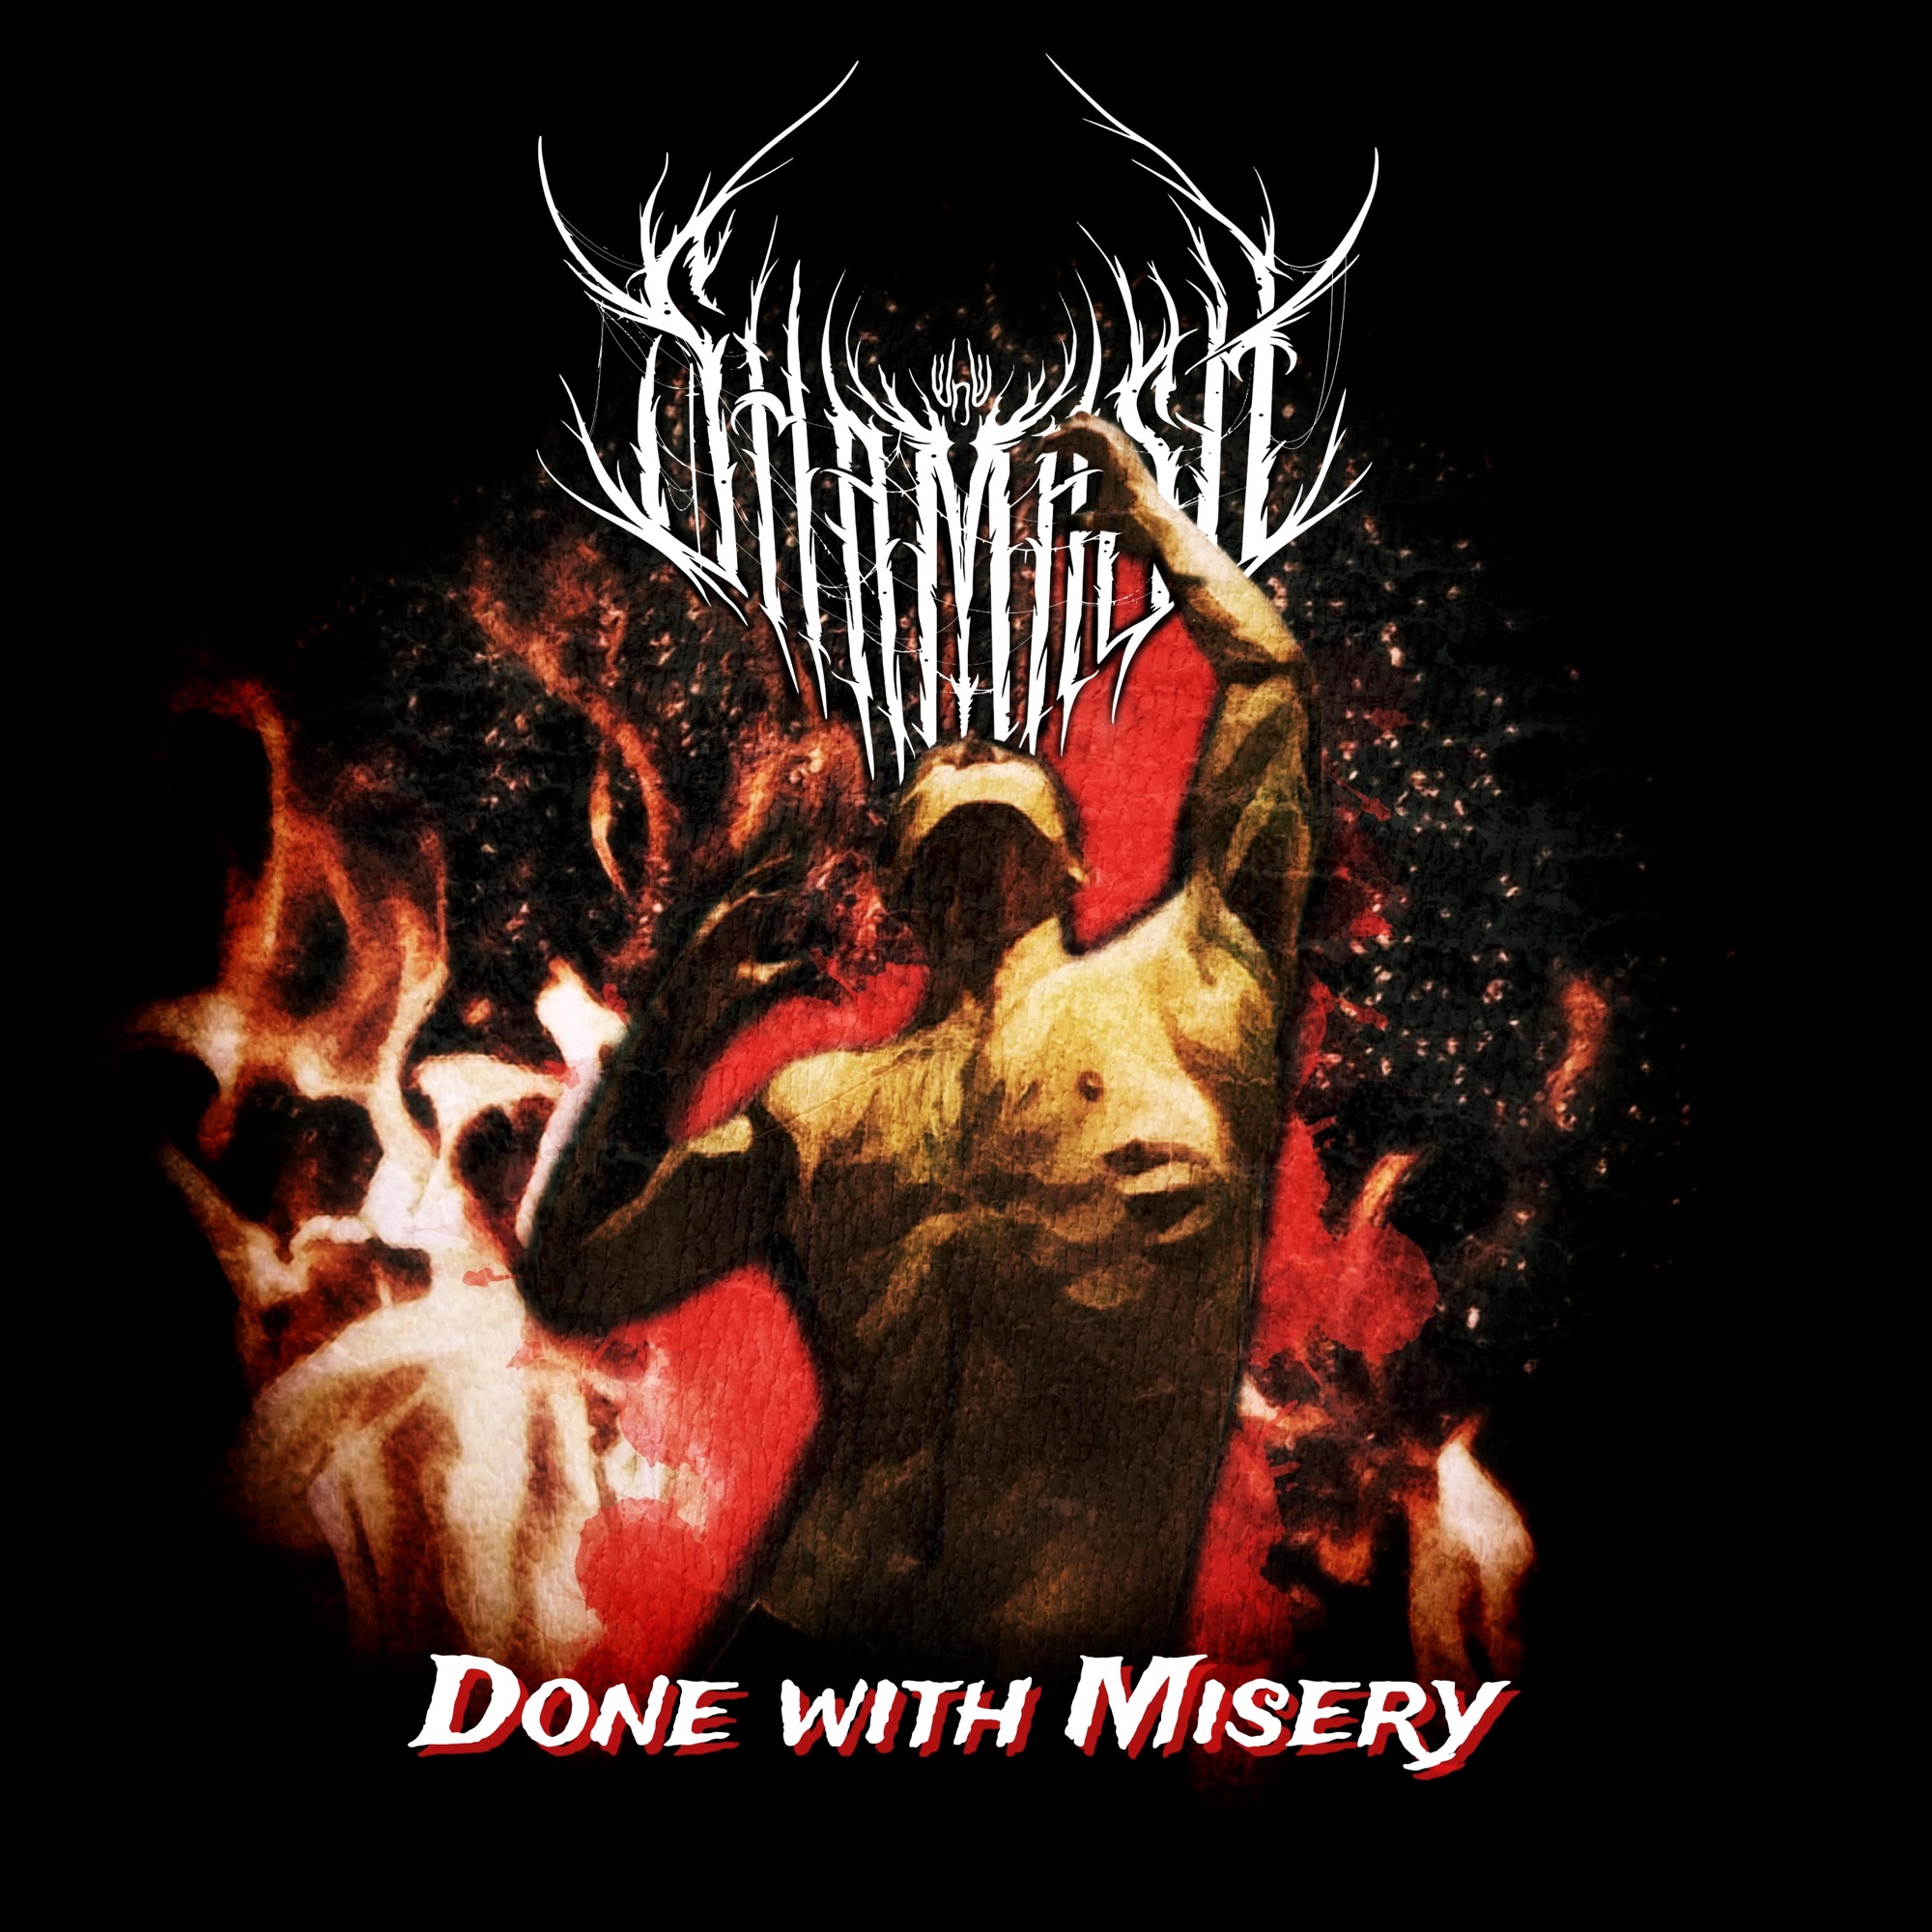 Art for Done with Misery by Shamash